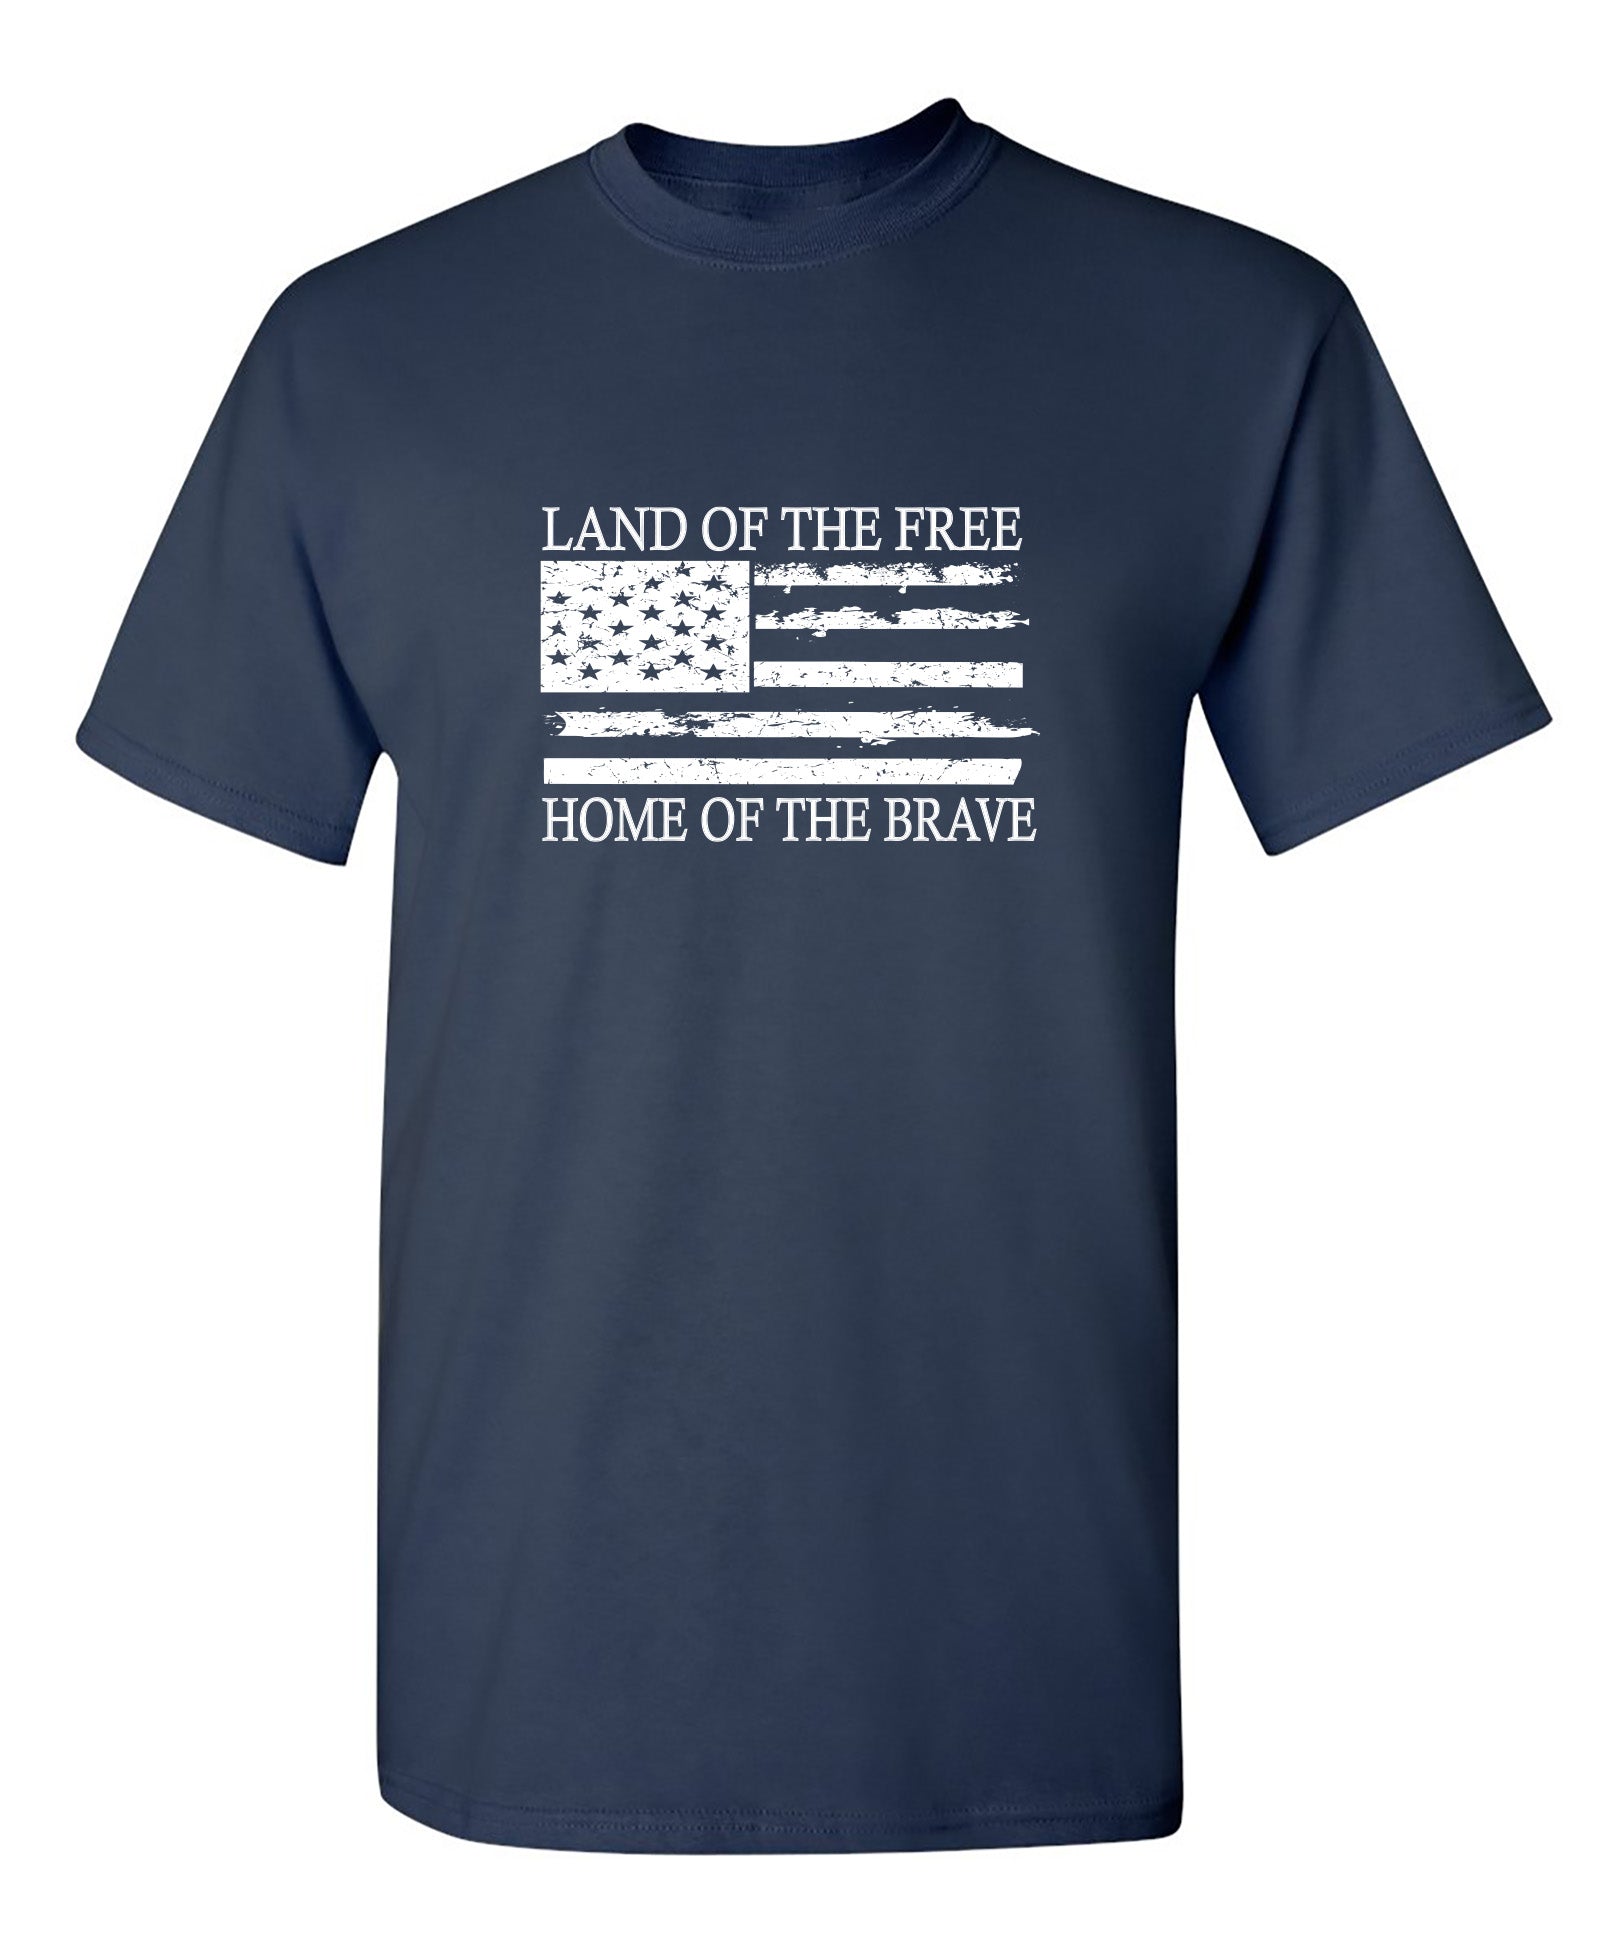 Land of the Free Home of the Brave - Funny T Shirts & Graphic Tees